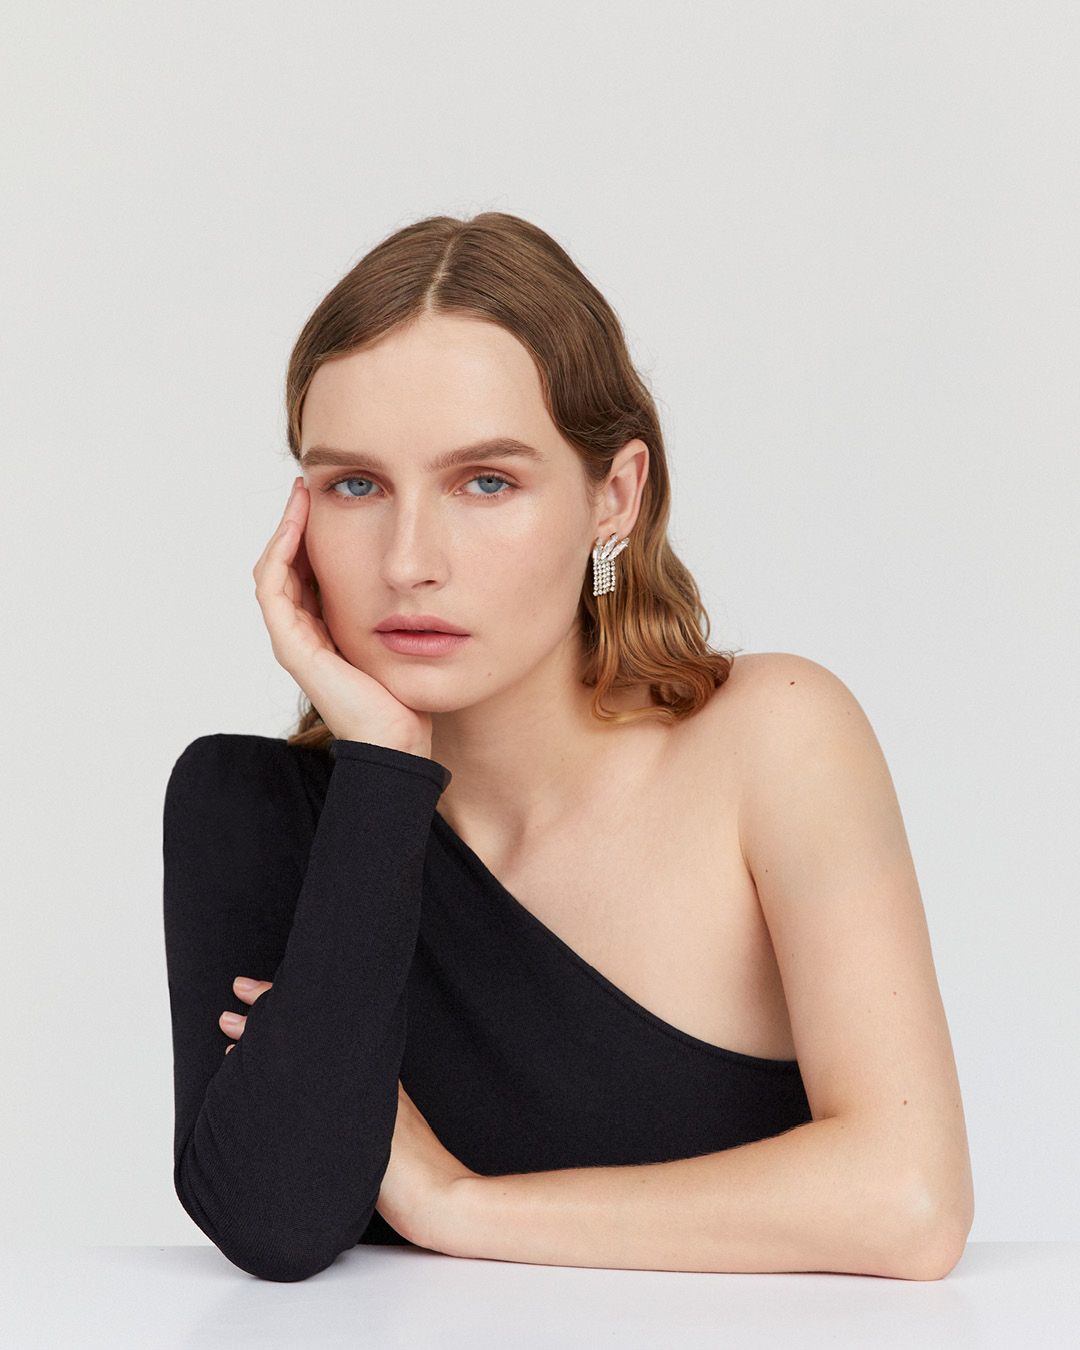 Olivia DeJonge with hand on chin wearing a black one-shouldered gown and black glove